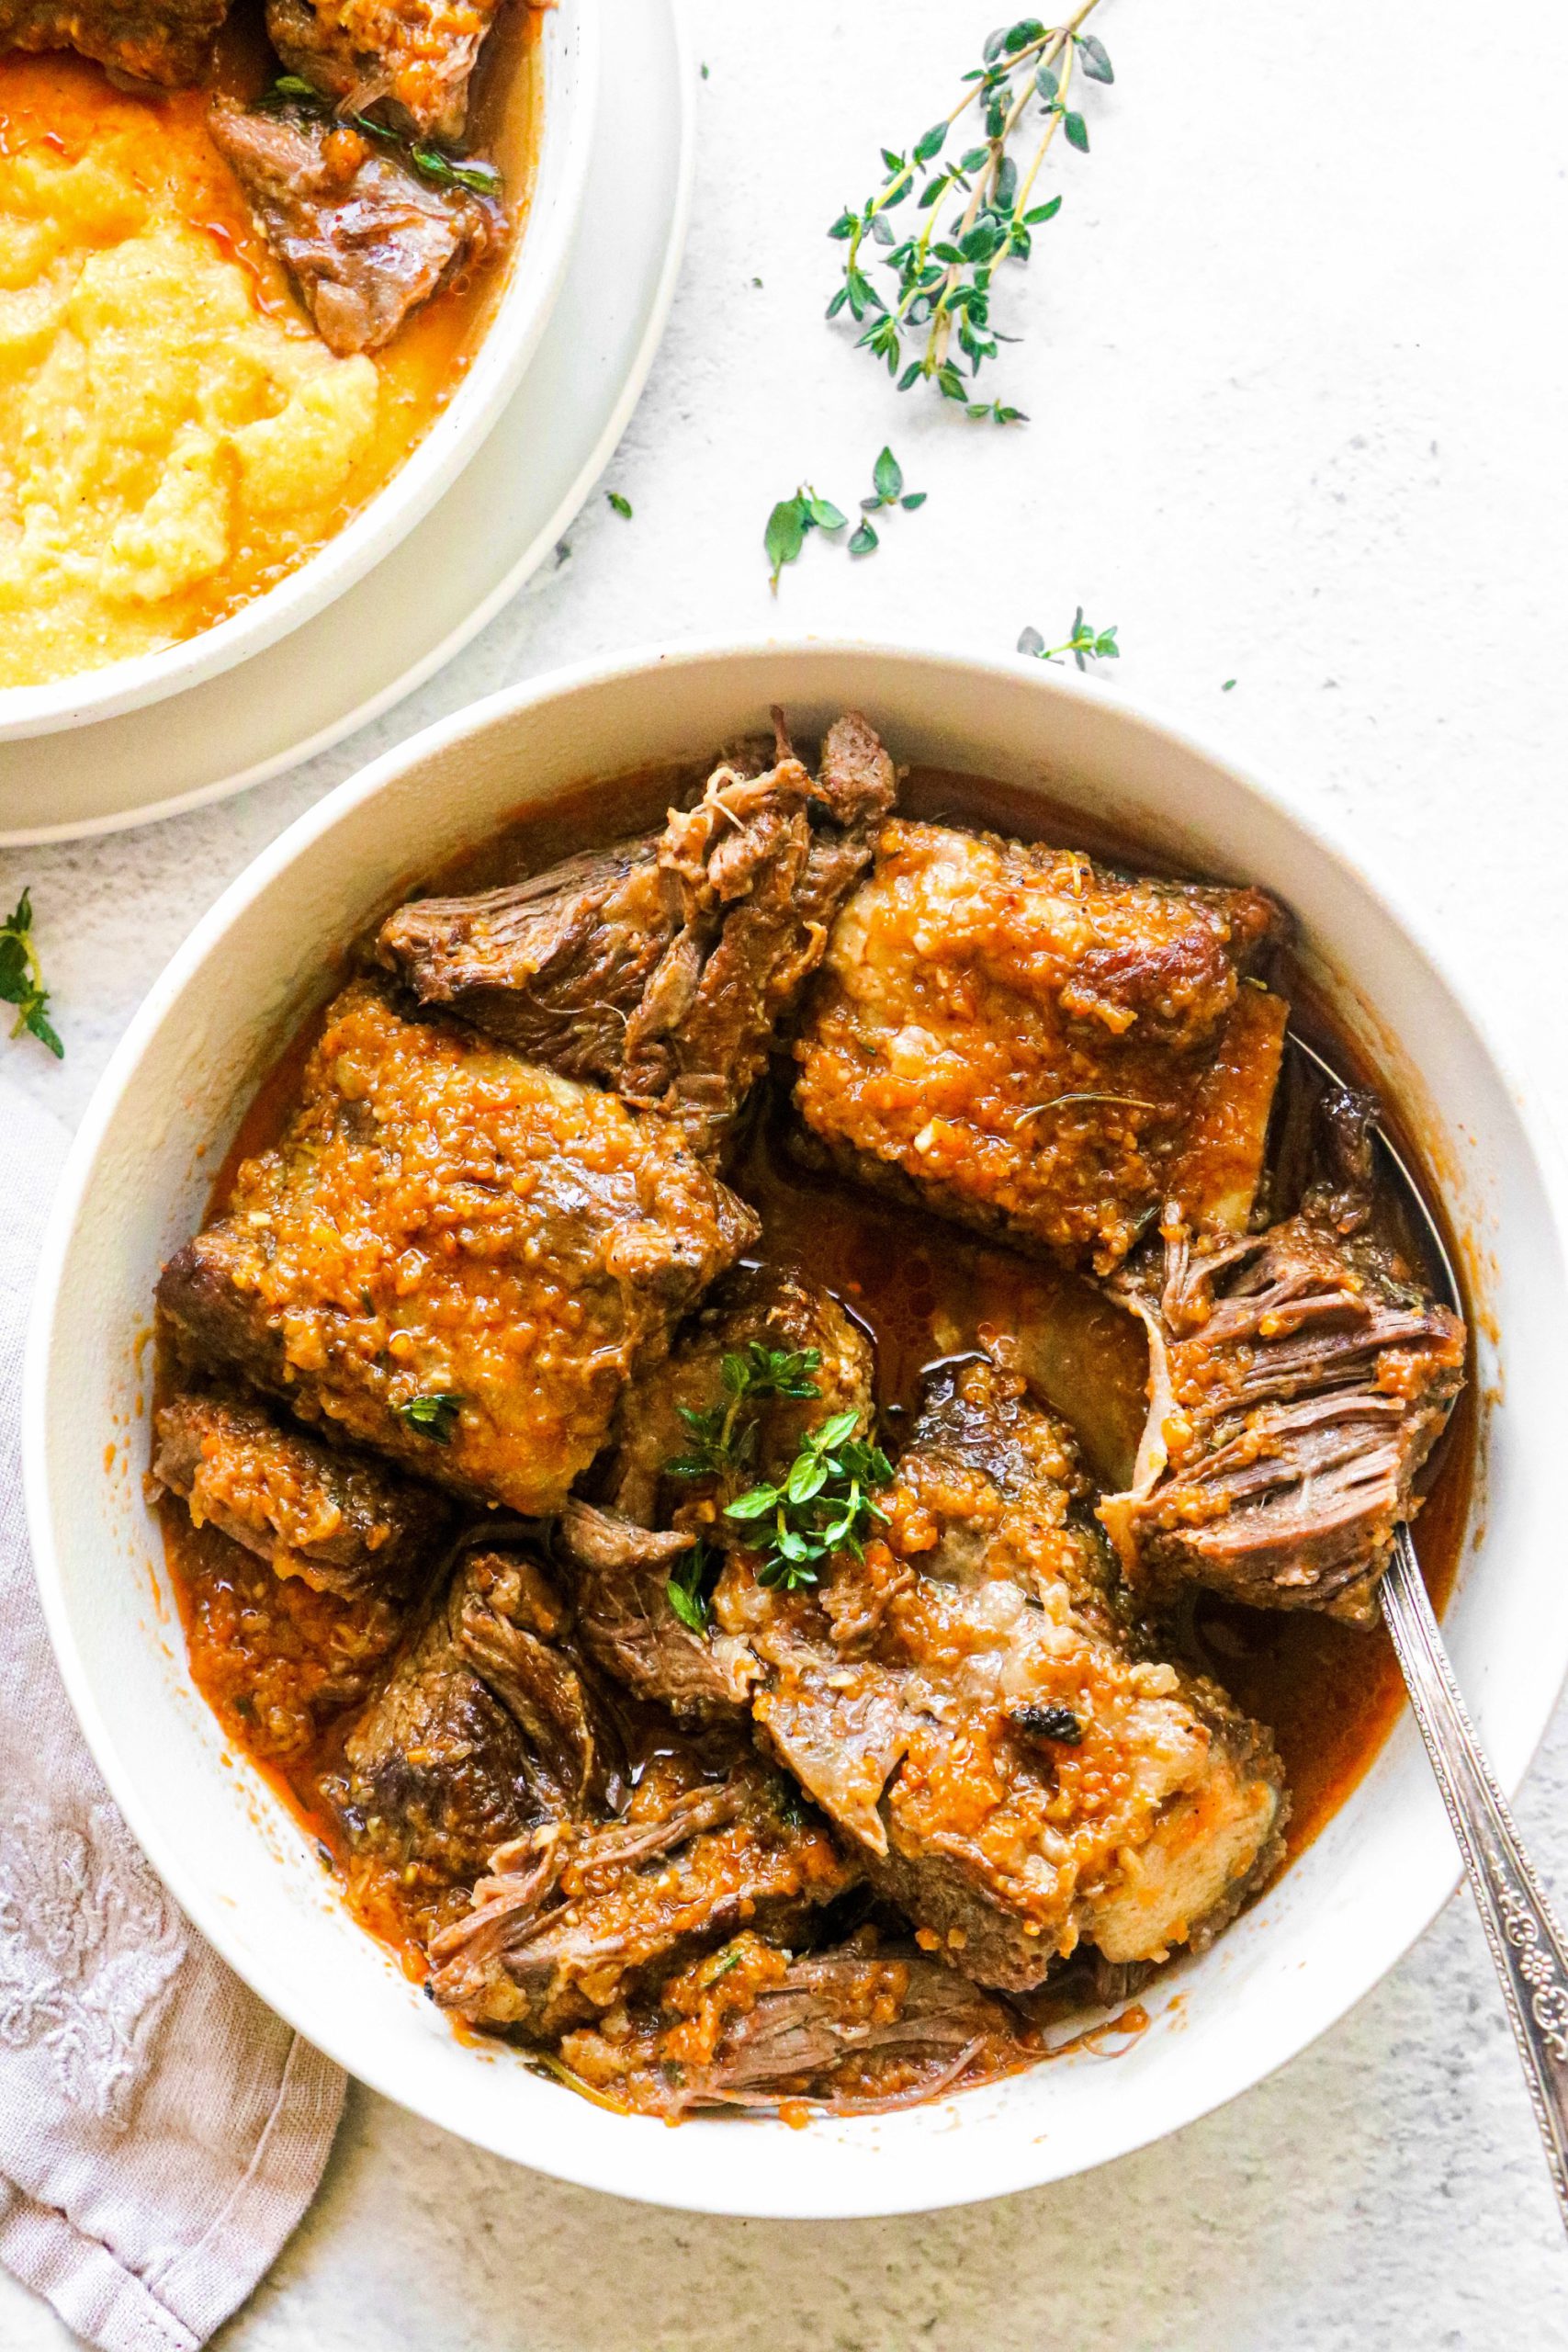 Braised Short Ribs with Cheesy Grits – Marisol Cooks